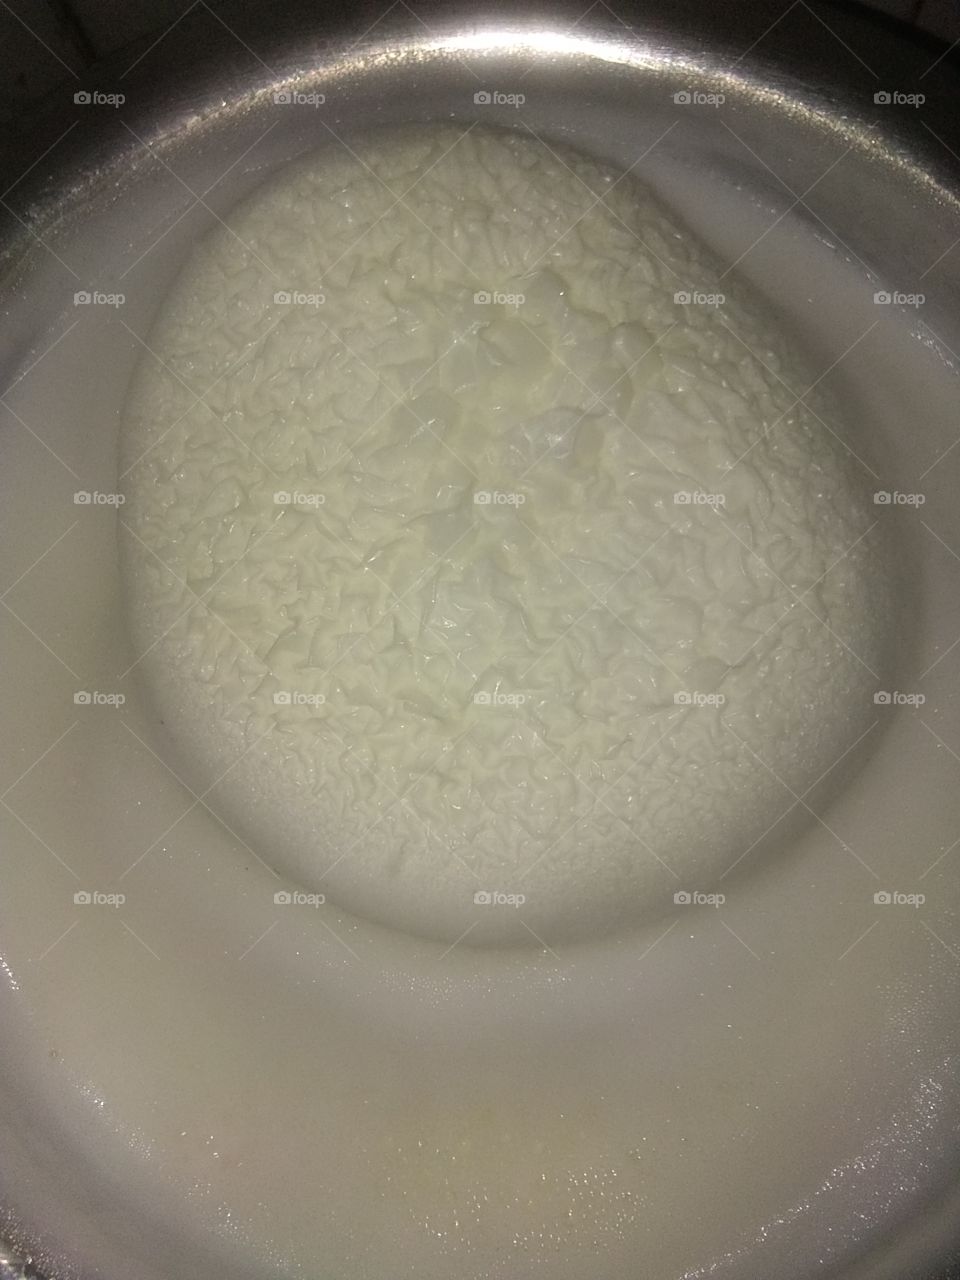 milk boiling stage